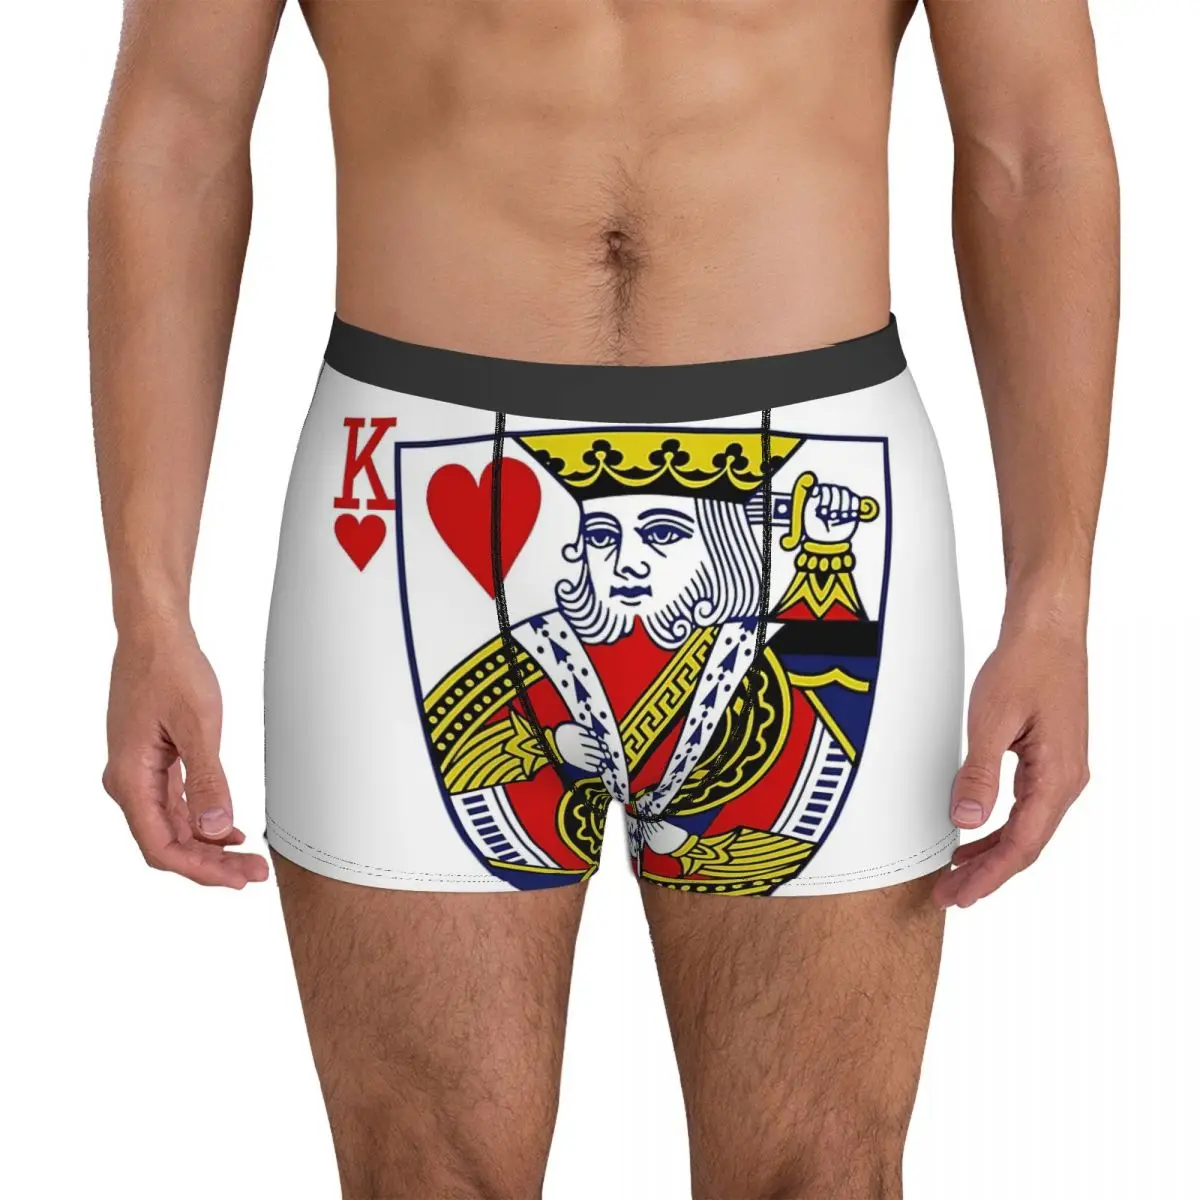 King Of Hearts Playing Card Underpants Breathbale Panties Male Underwear Print Shorts Boxer Briefs